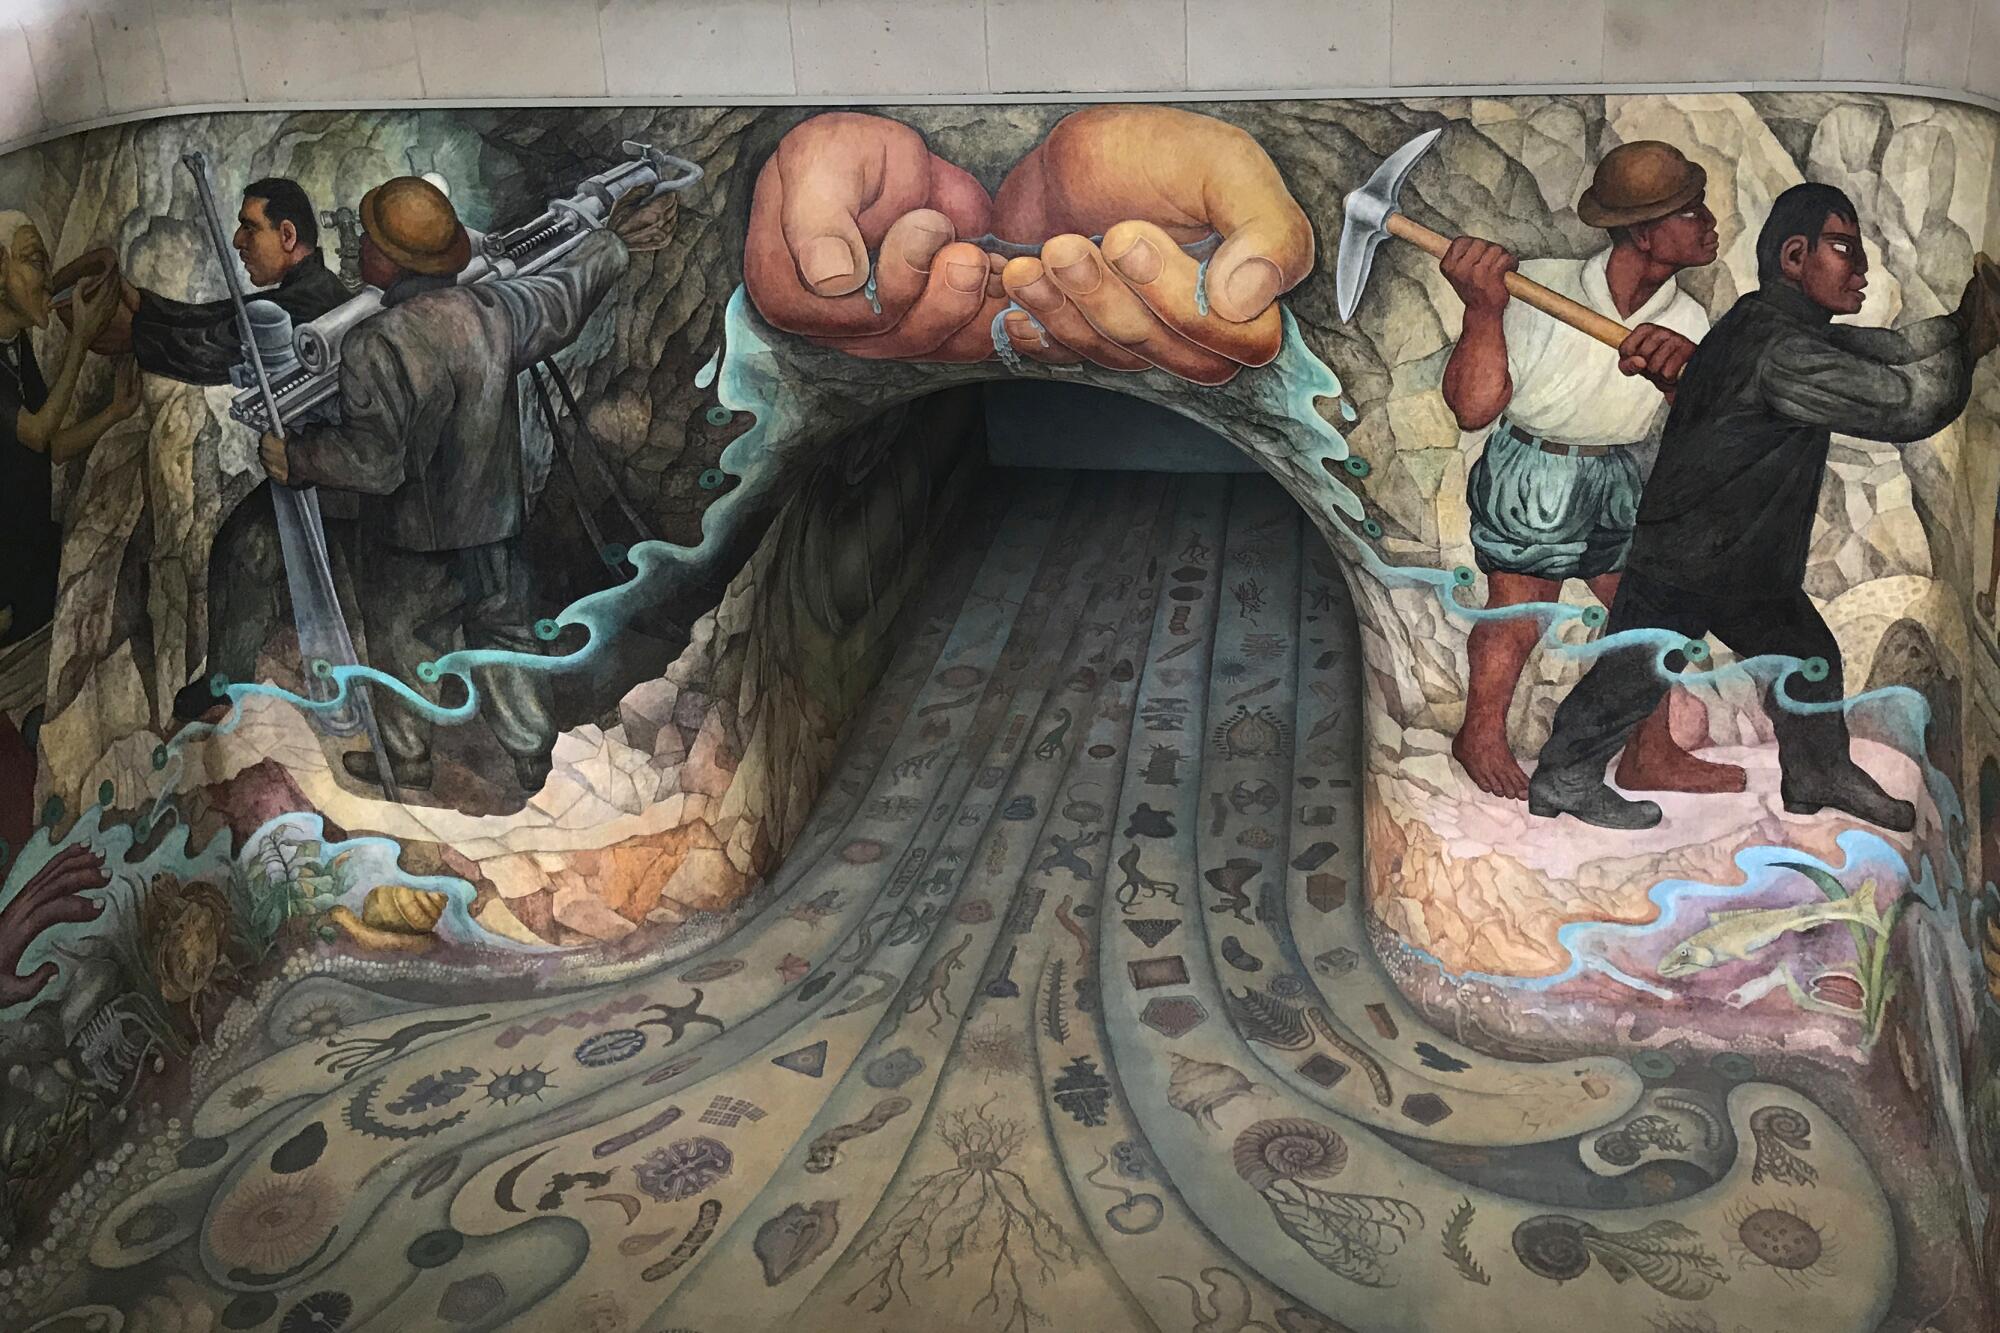 A mural depicts hands cupping water over a tunnel, with images of workers on each side. 